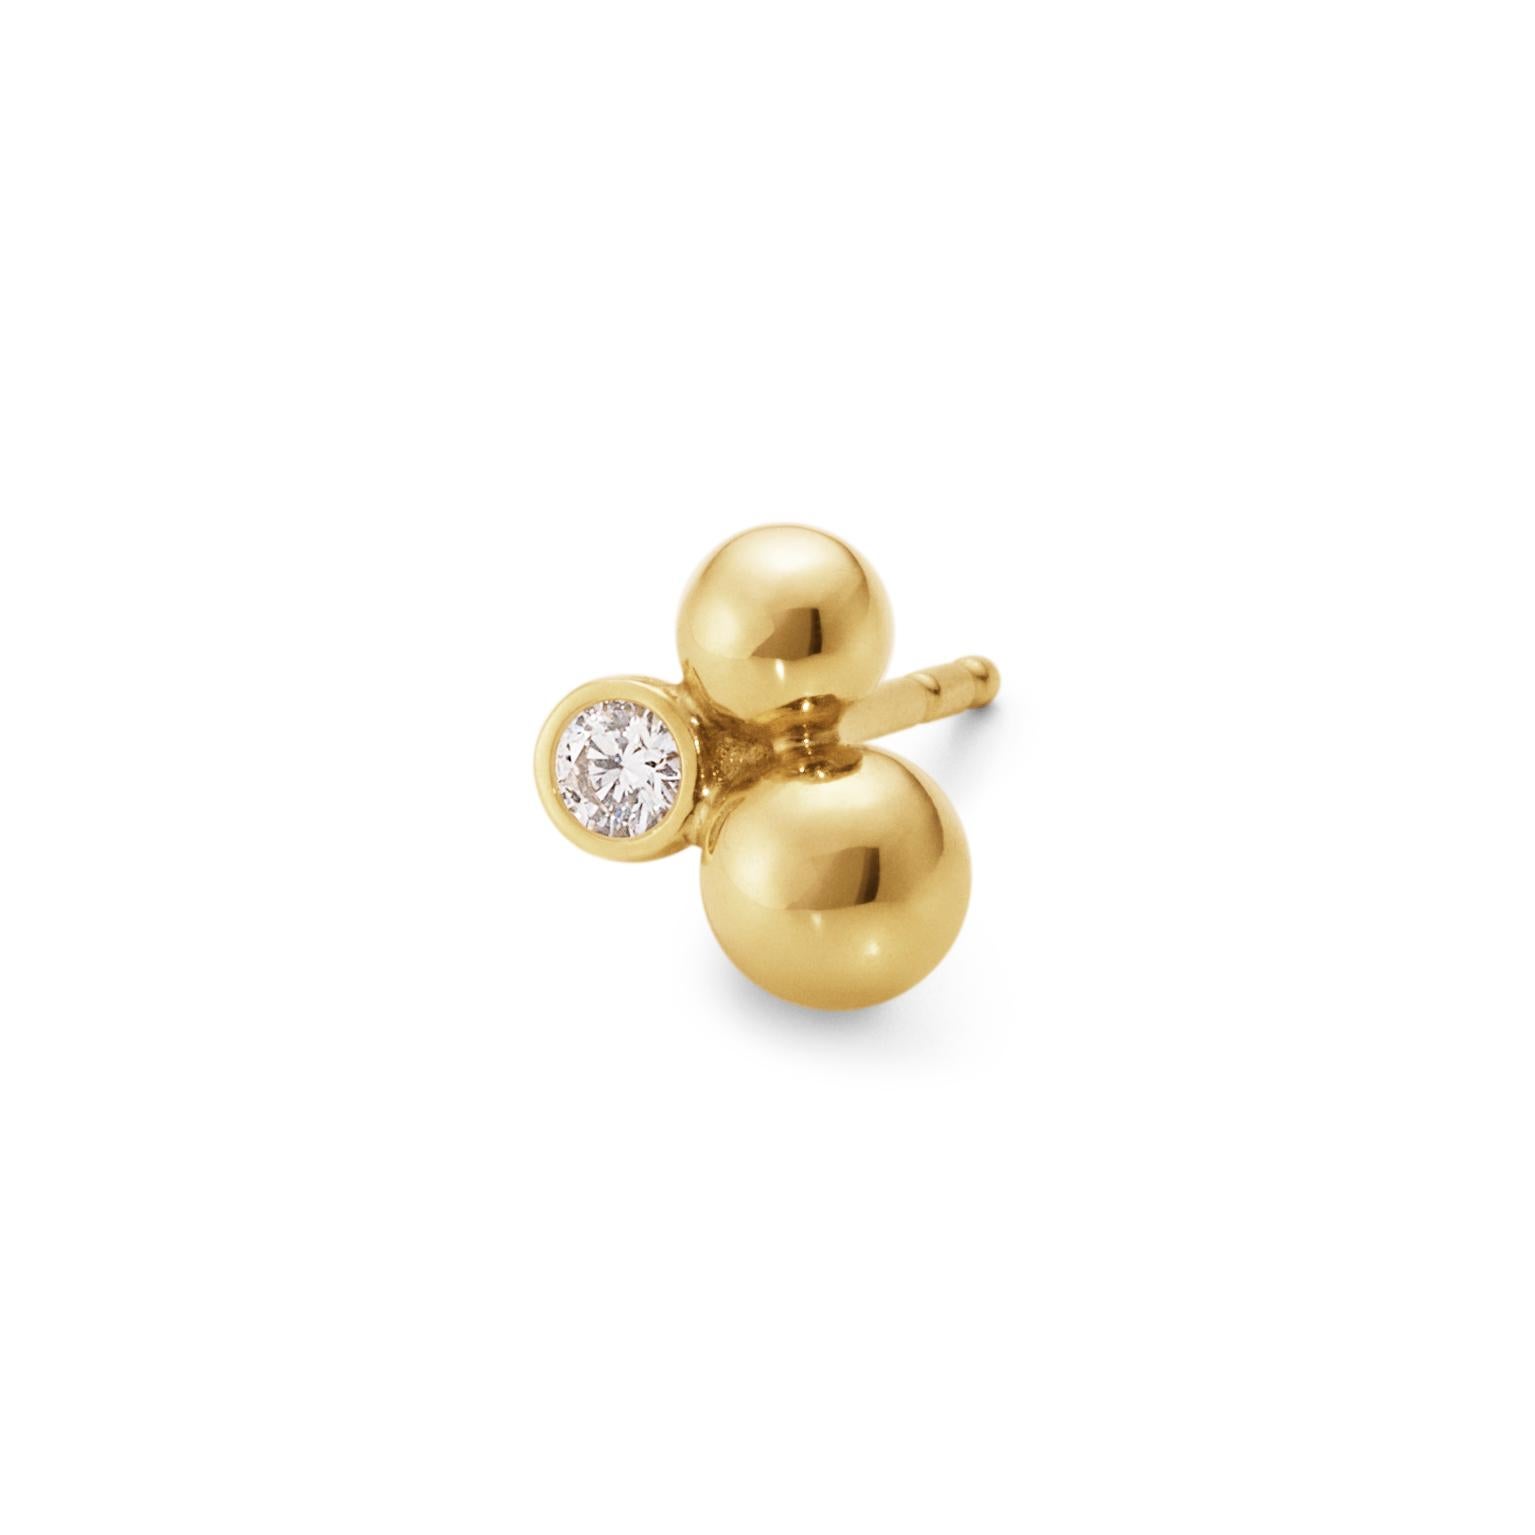 These subtle and sophisticated ear studs are each formed from two 18 karat recycled yellow gold beads clustered together with a single diamond. With an elegant simplicity that respects Georg Jensen’s classic heritage whilst still being contemporary,